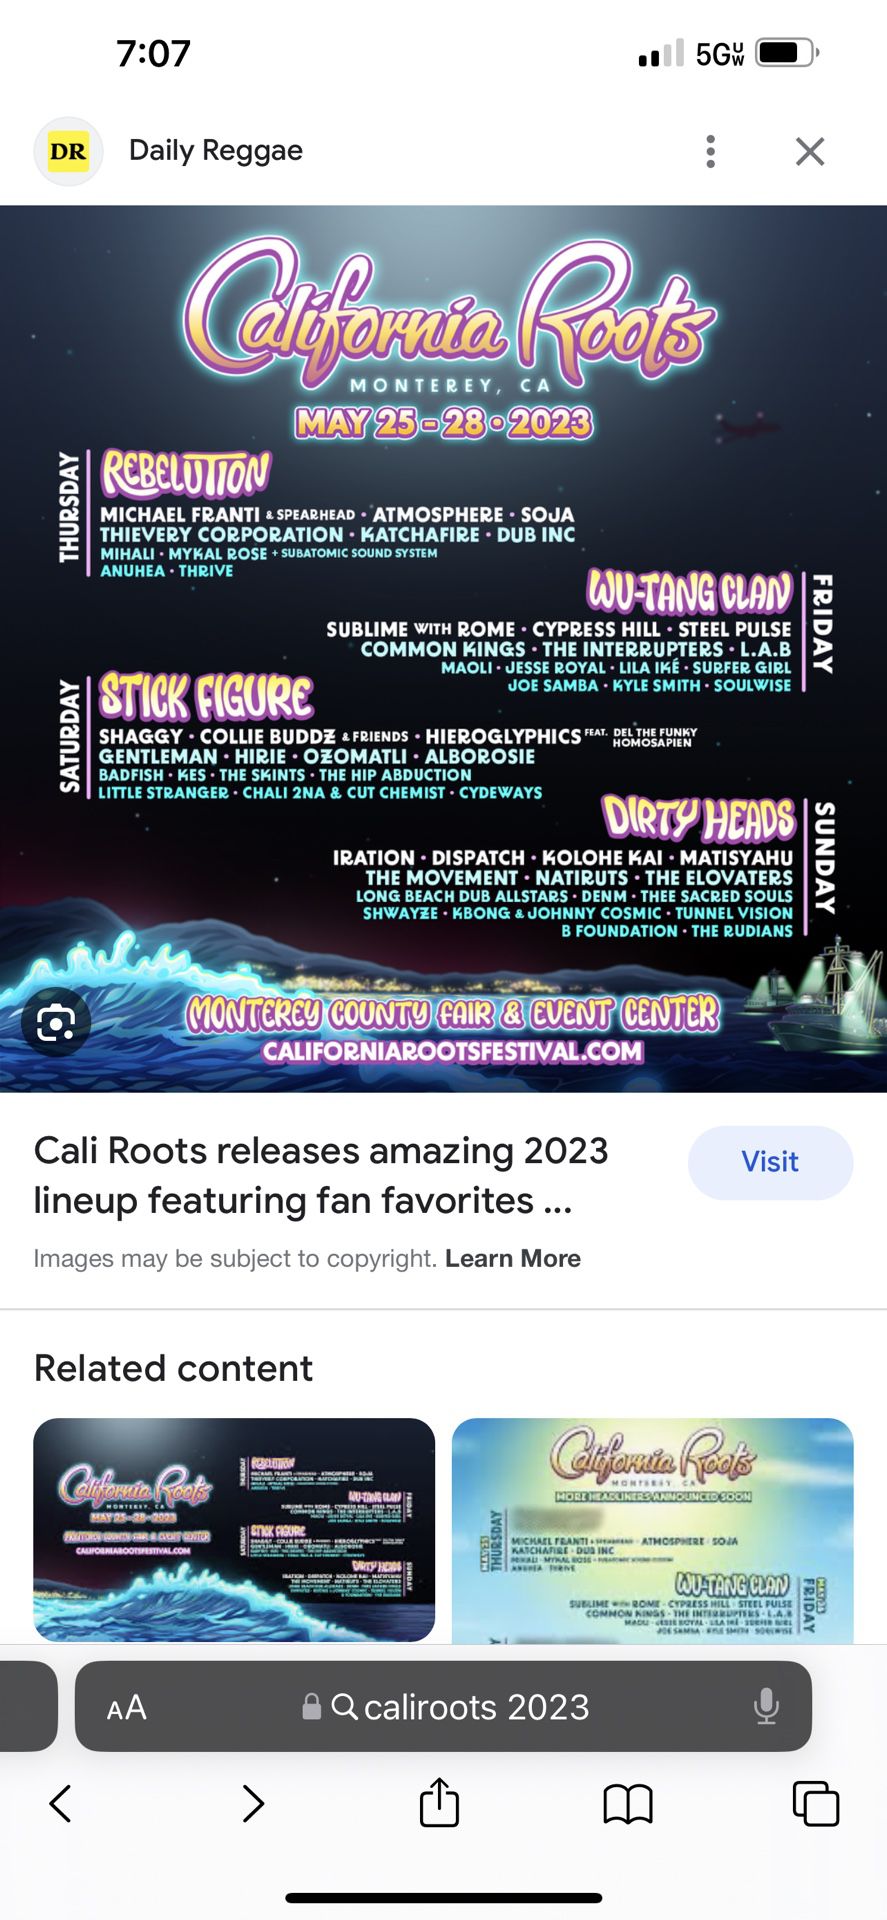 Tickets To CaliRoots 2023